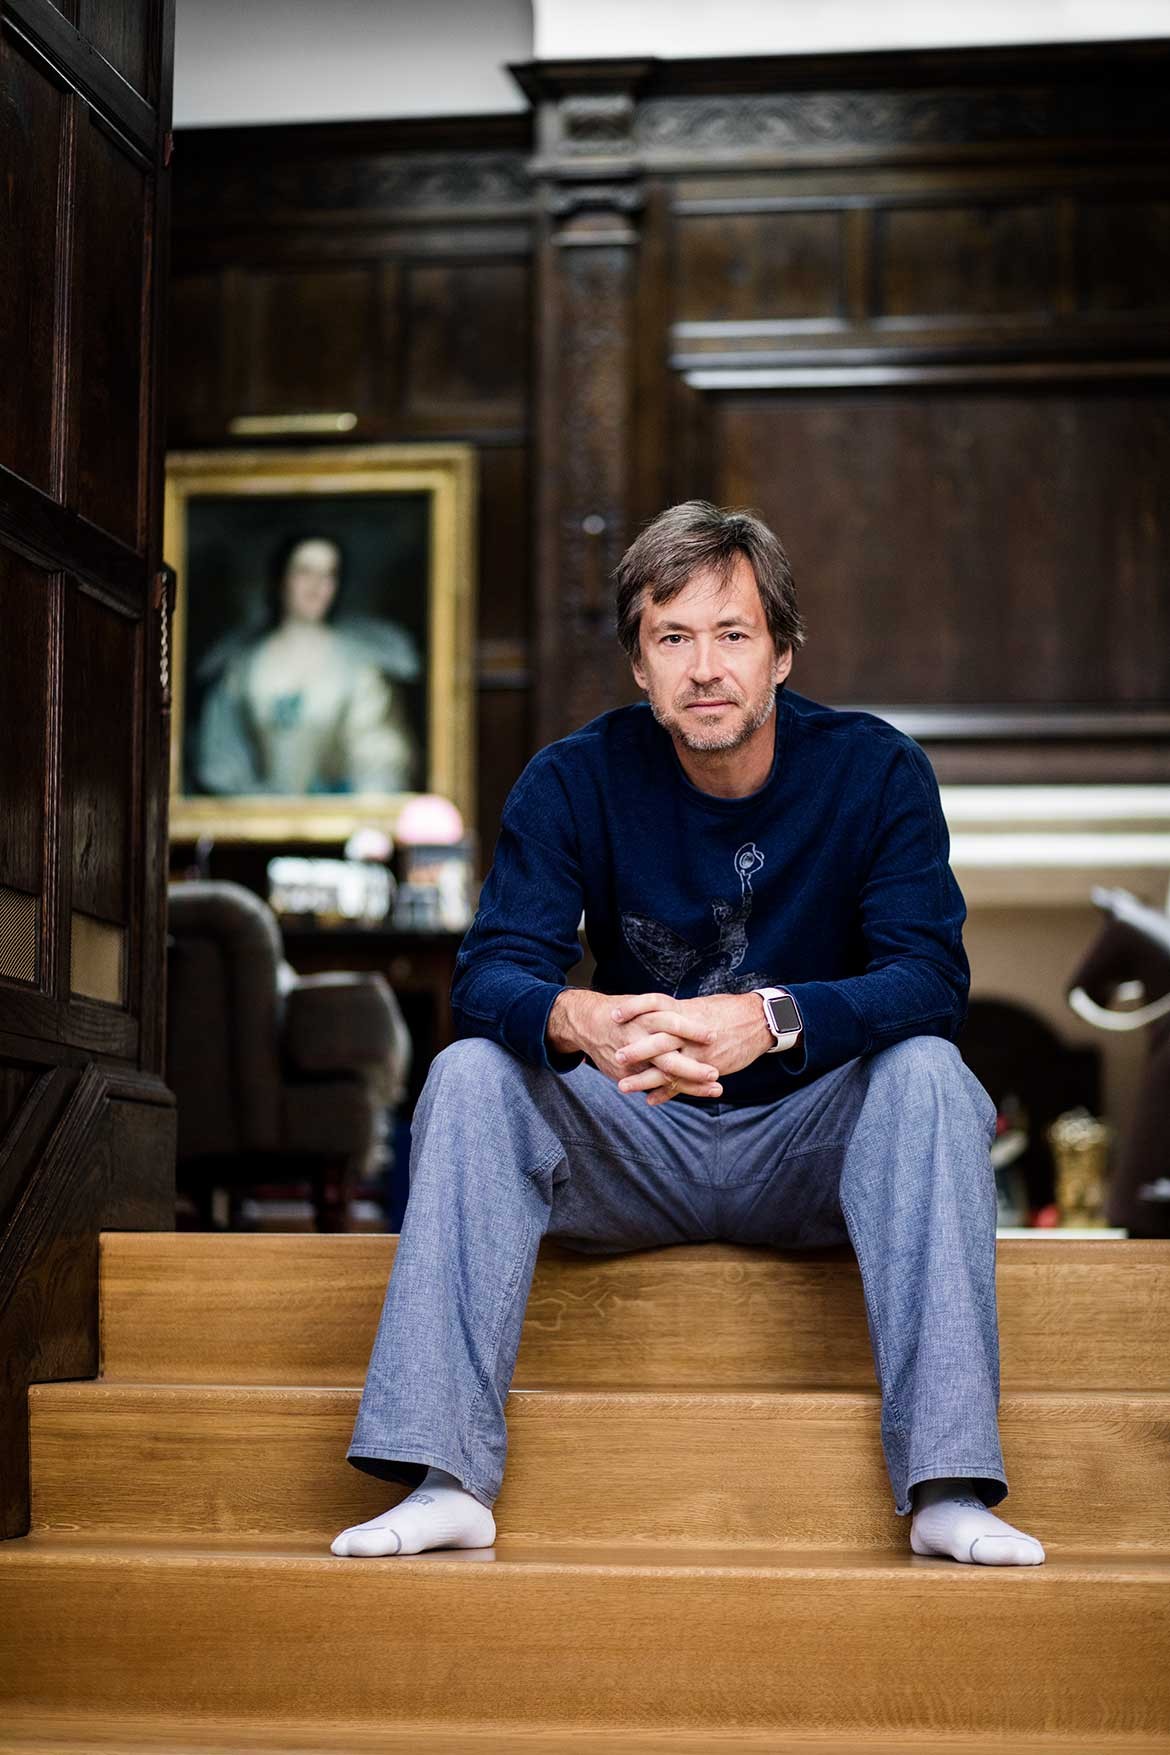 Marc Newson - The Style & Design 100 - TIME